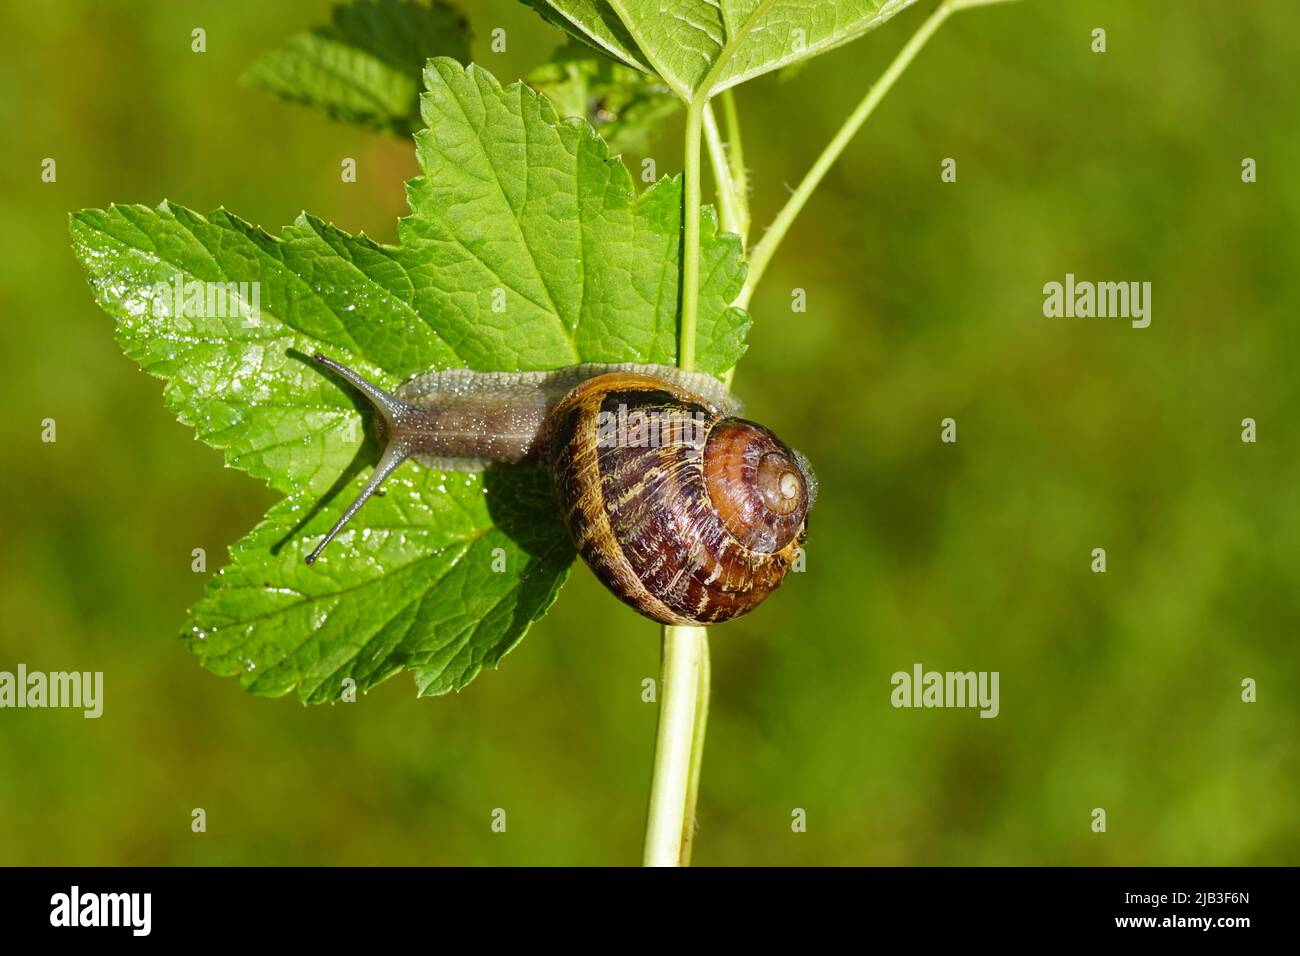 Garden snail (Cornu aspersum) crawling on a twig and leaf of currant. Family land snails ( Helicidae). Spring, June, Dutch garden. Stock Photo